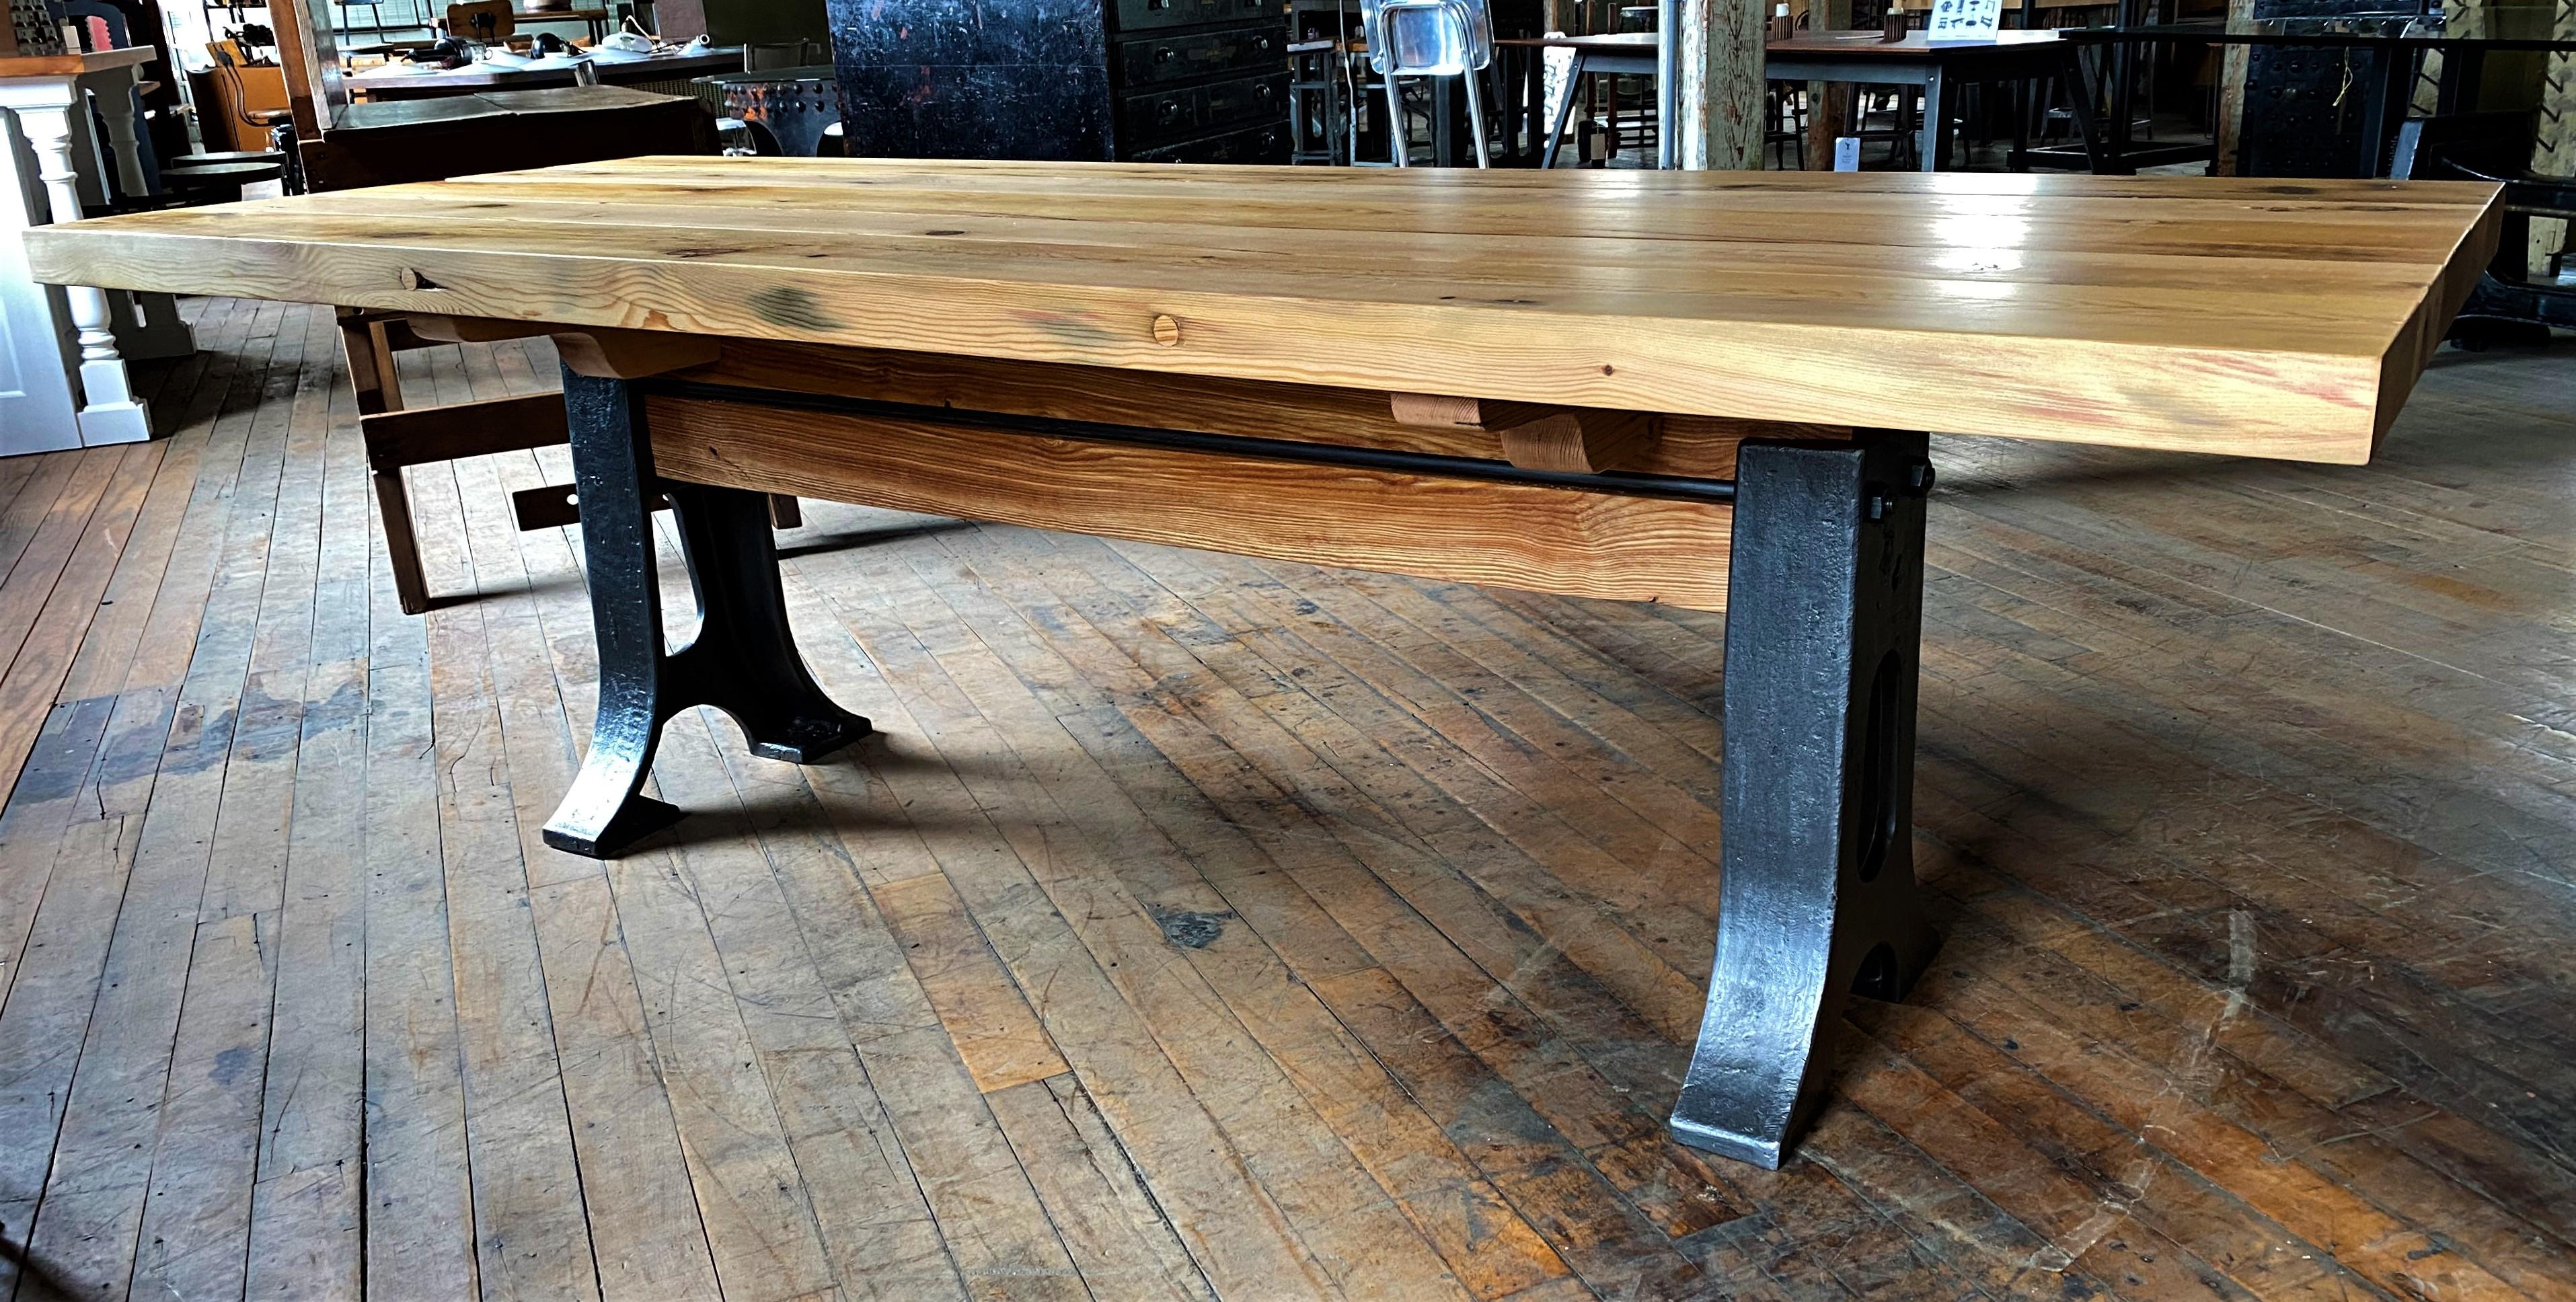 Vintage industrial dining table
Designed & built by get back, Inc. using reclaimed wood and vintage industrial cast iron legs
Overall dimensions: 36